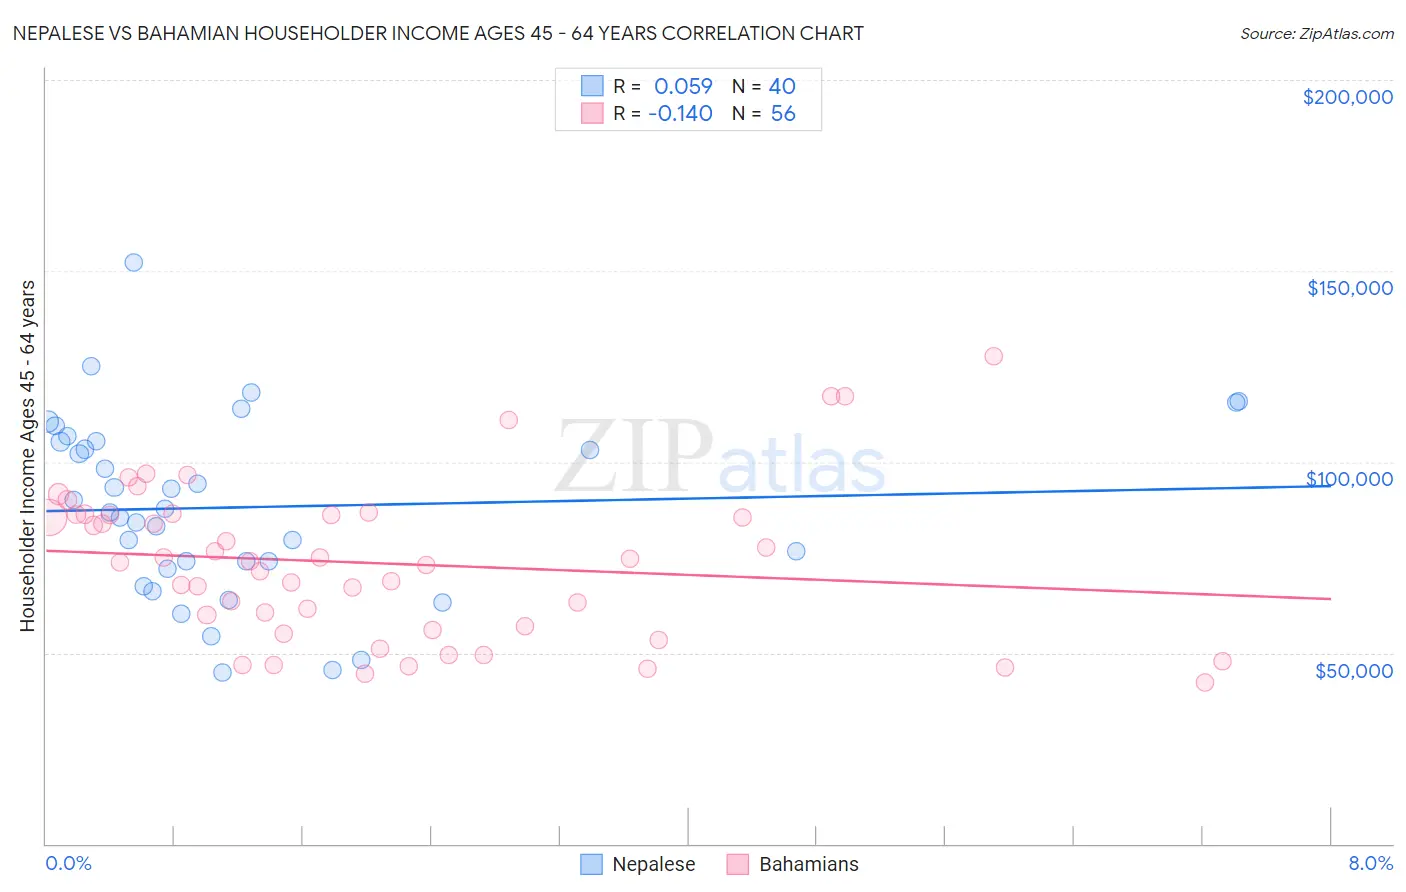 Nepalese vs Bahamian Householder Income Ages 45 - 64 years